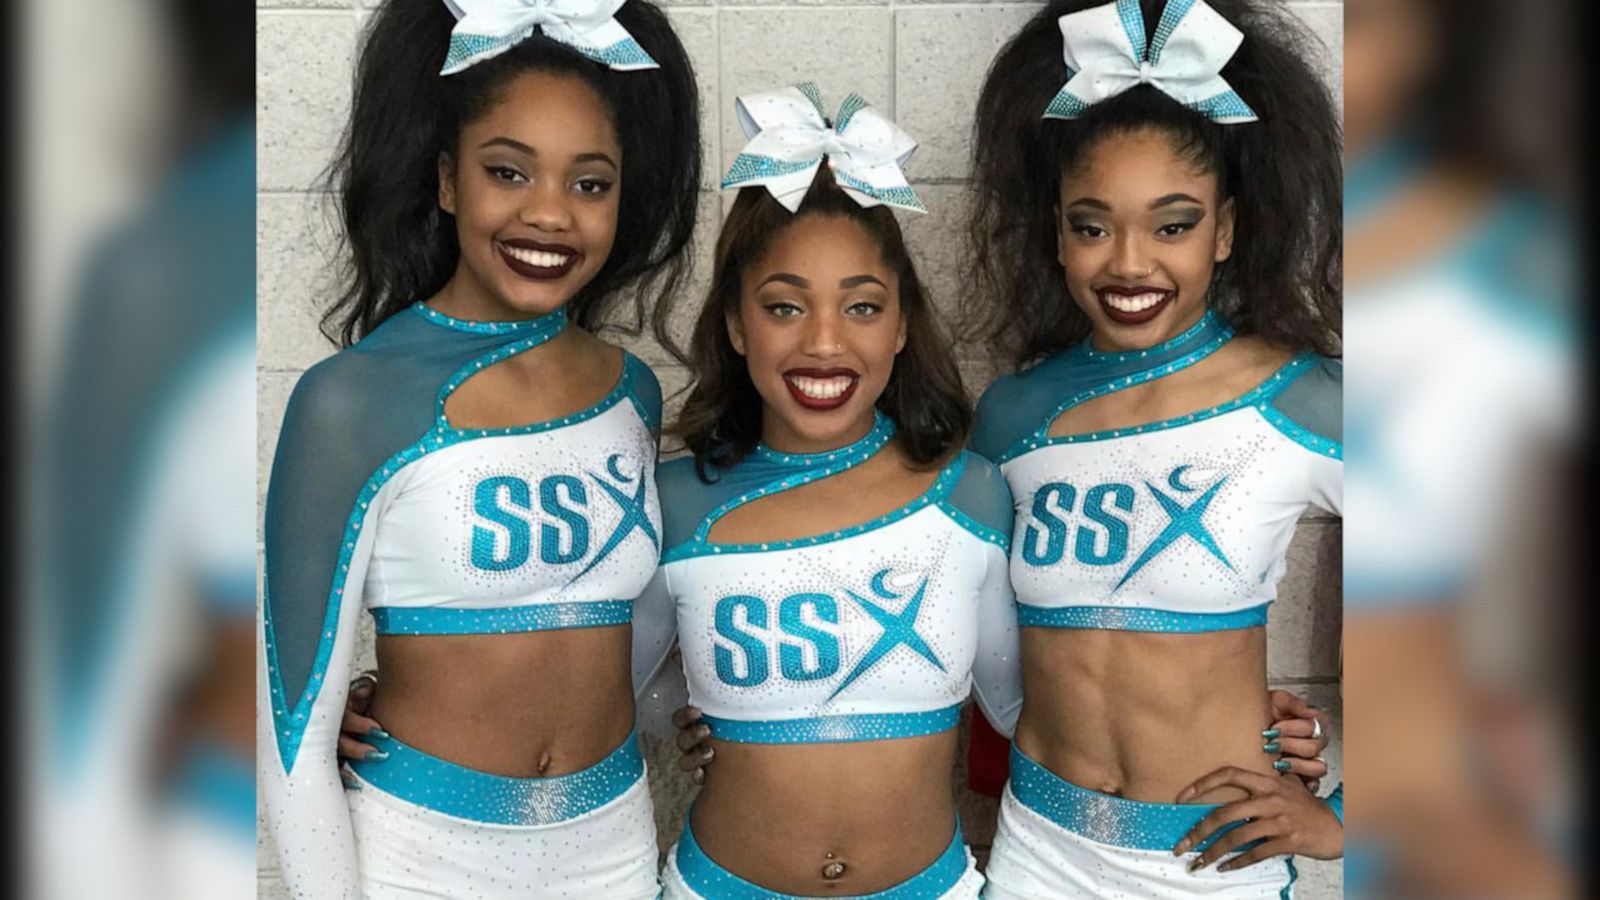 Black Girls Cheer How A Moms Social Media Group Sparked A Movement